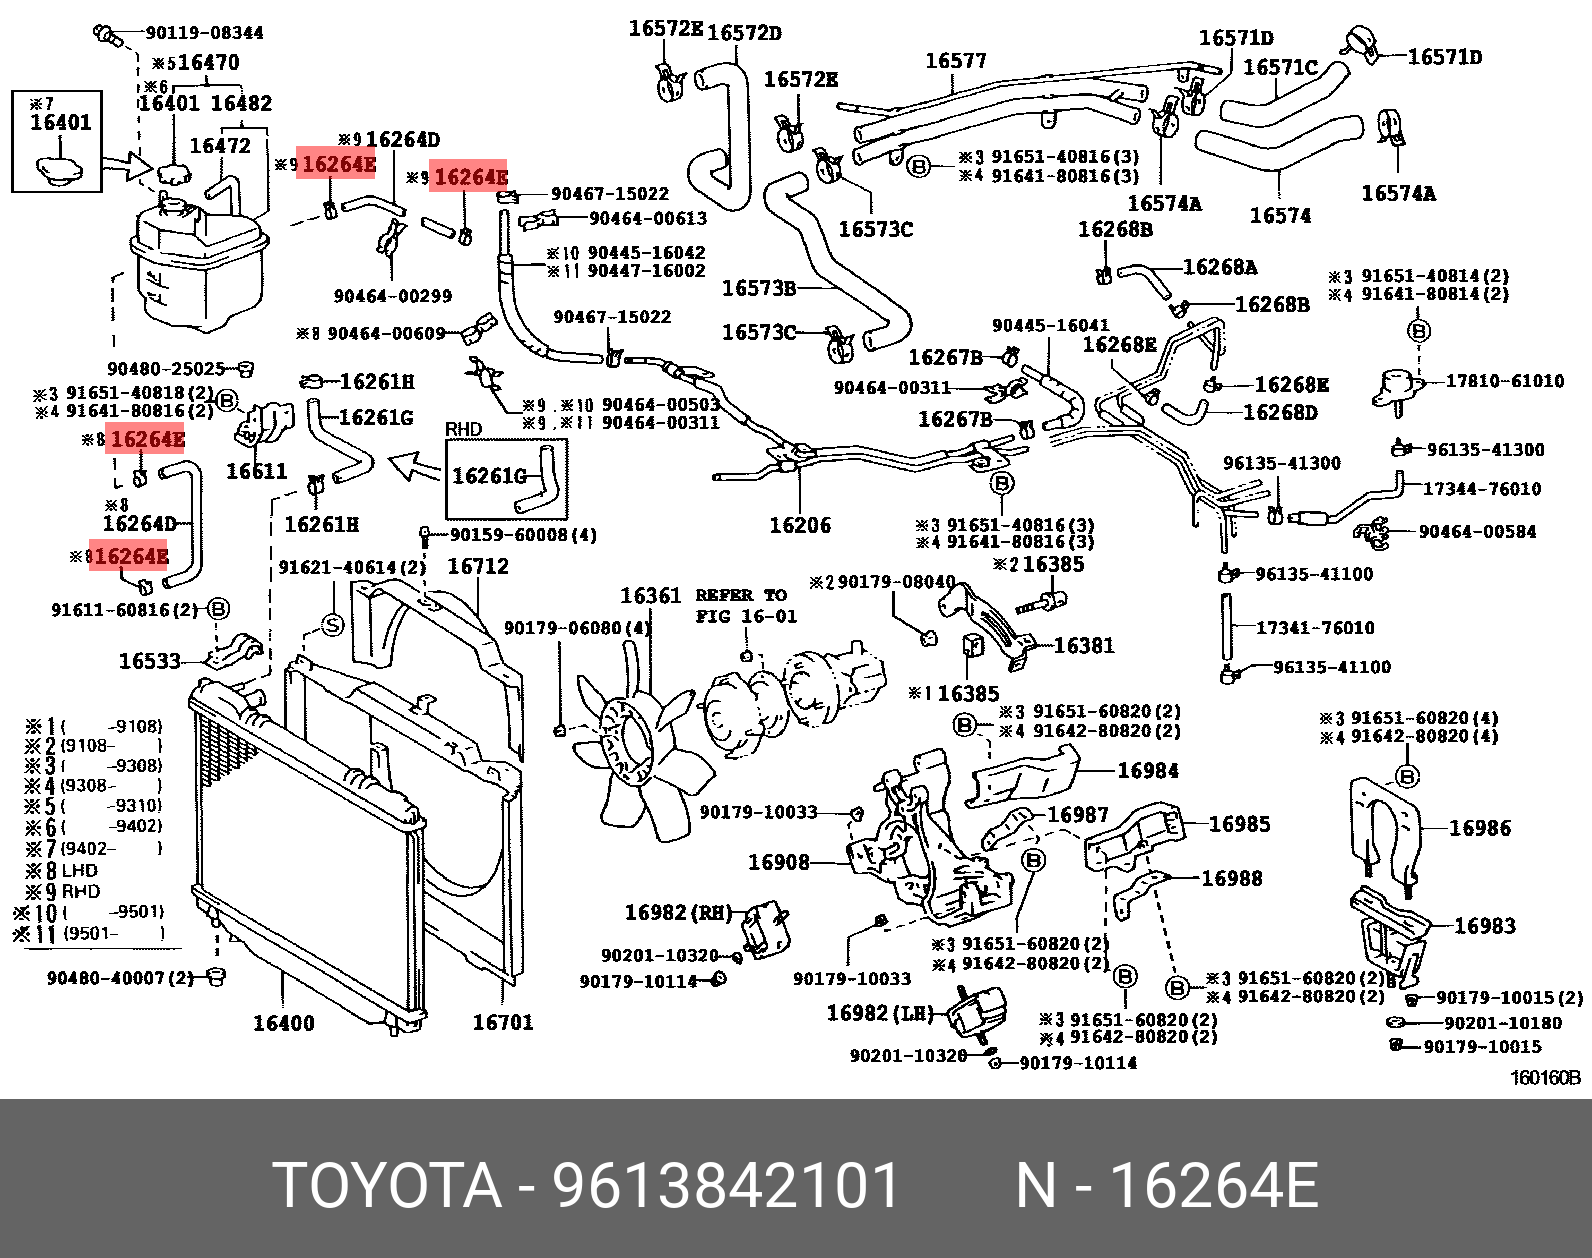 CAMRY 201706-, CLAMP OR CLIP(FOR WATER BY-PASS HOSE NO.3)